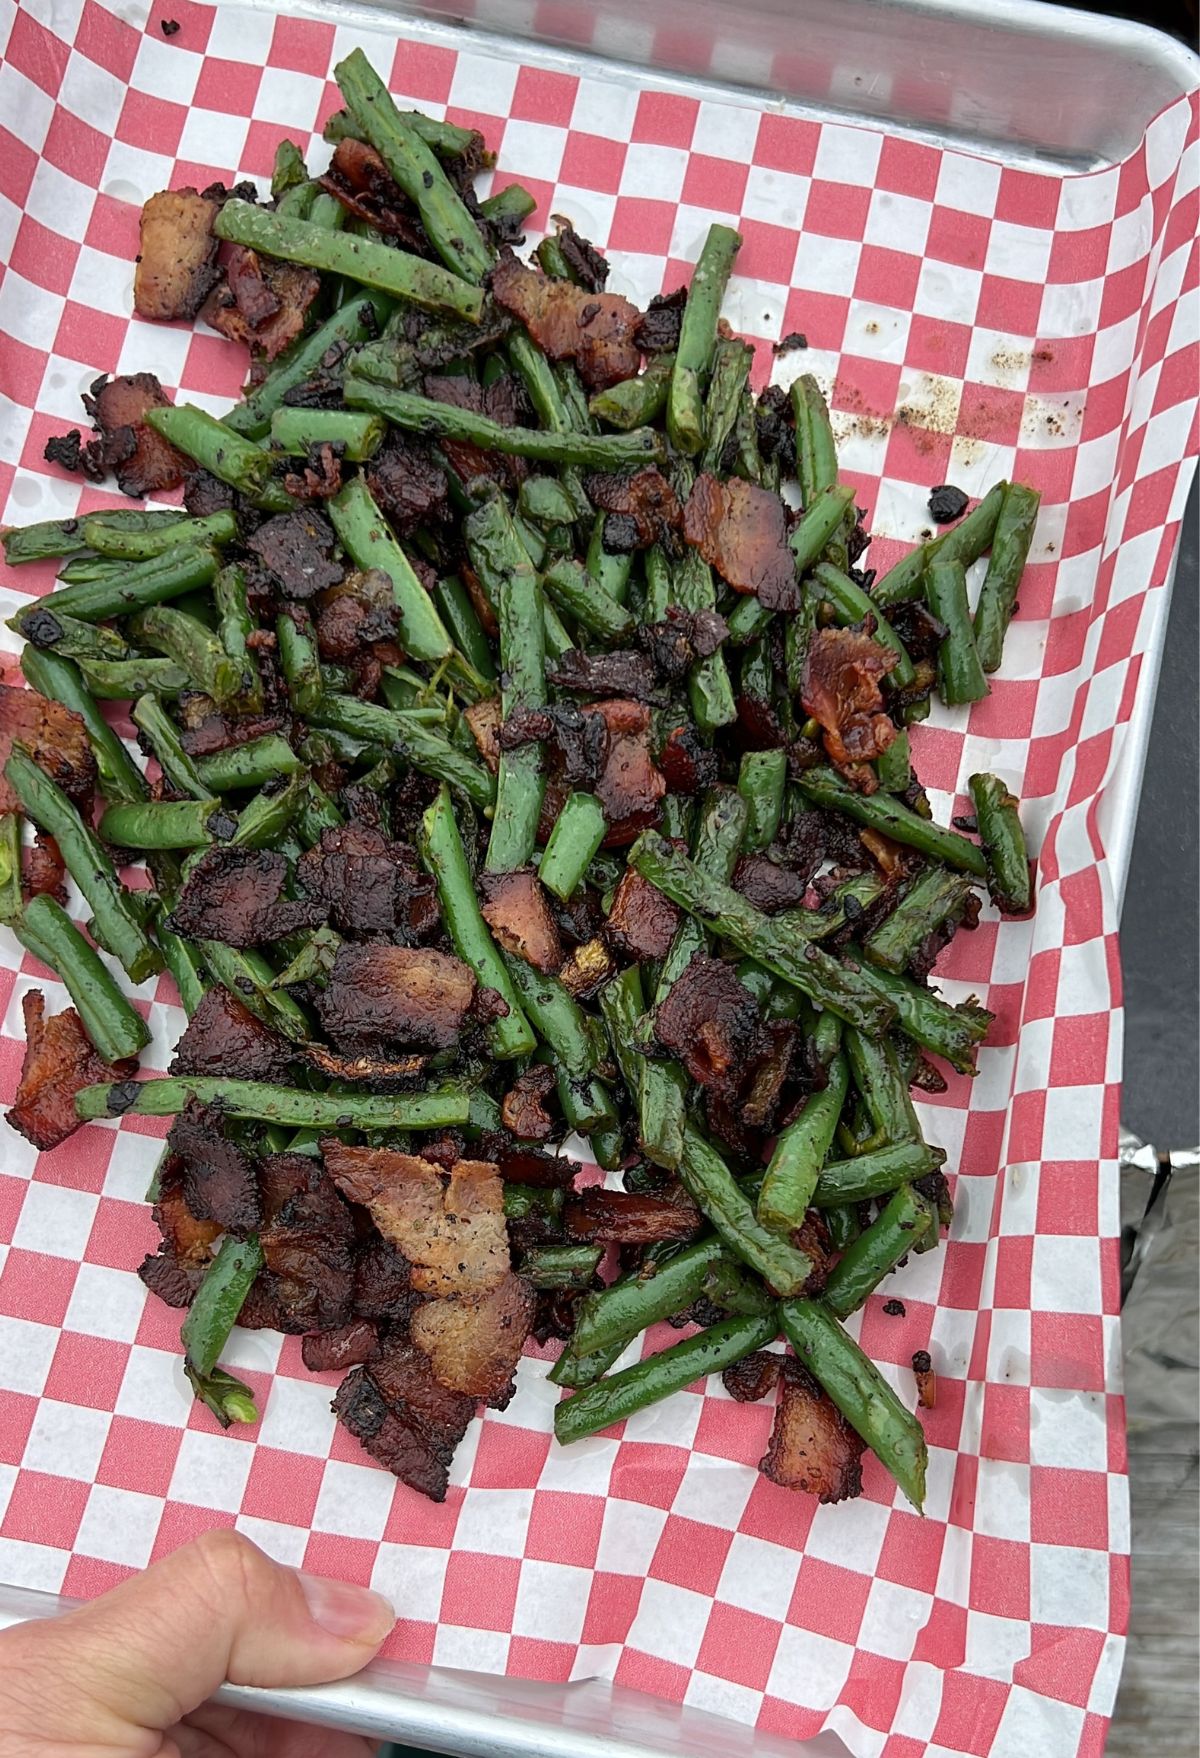 A tray of sautéed green beans and bacon served on red and white checkered paper, held by a person.